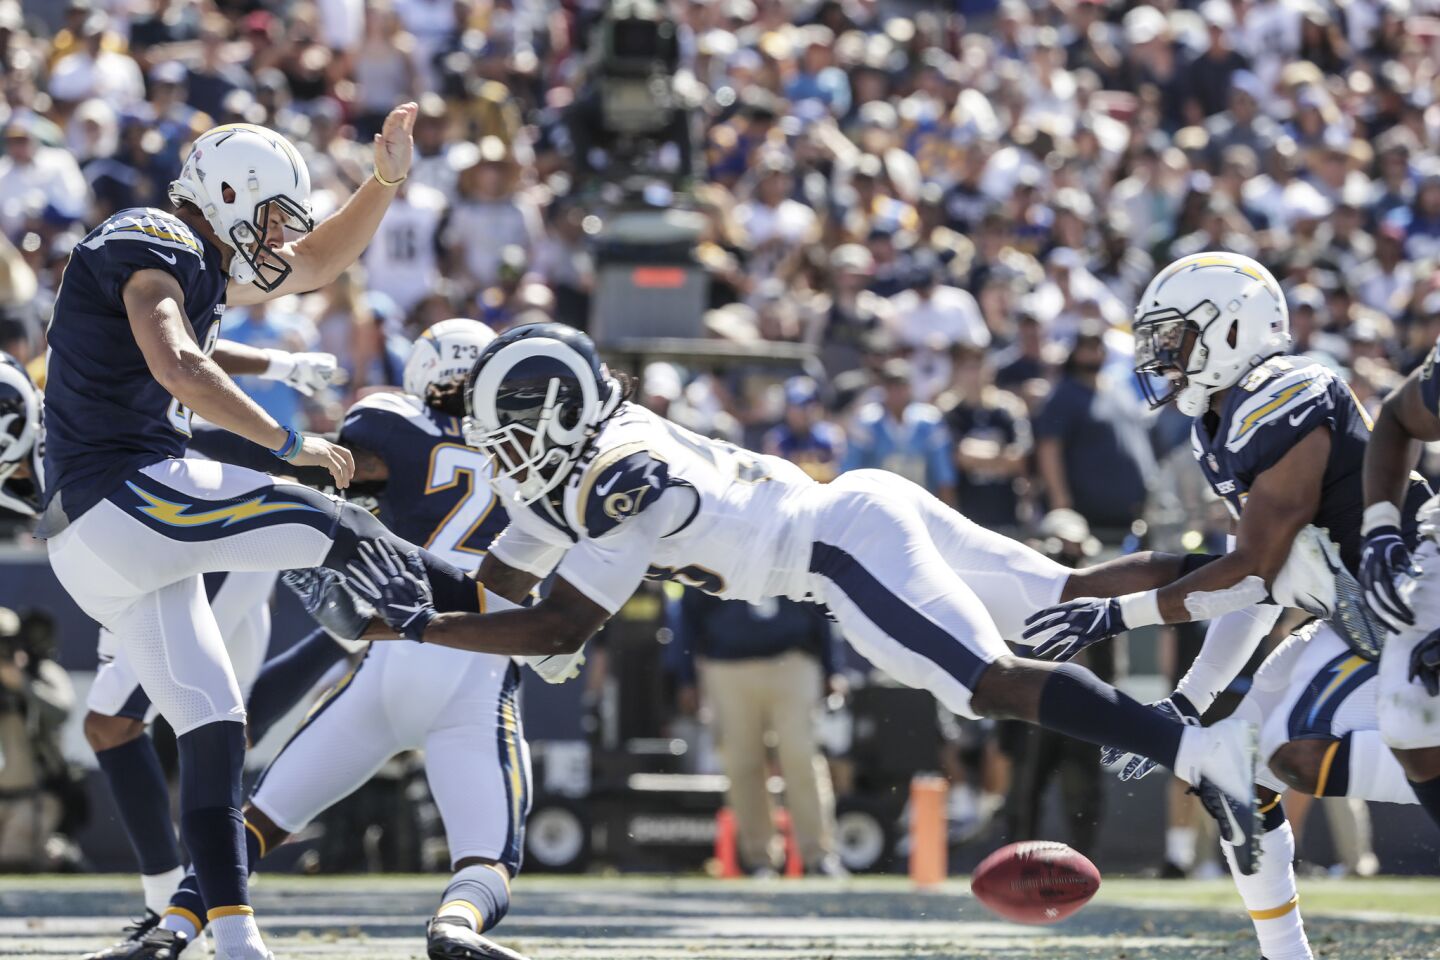 5 things we learned from LA Rams 13-6 loss to the Chargers on